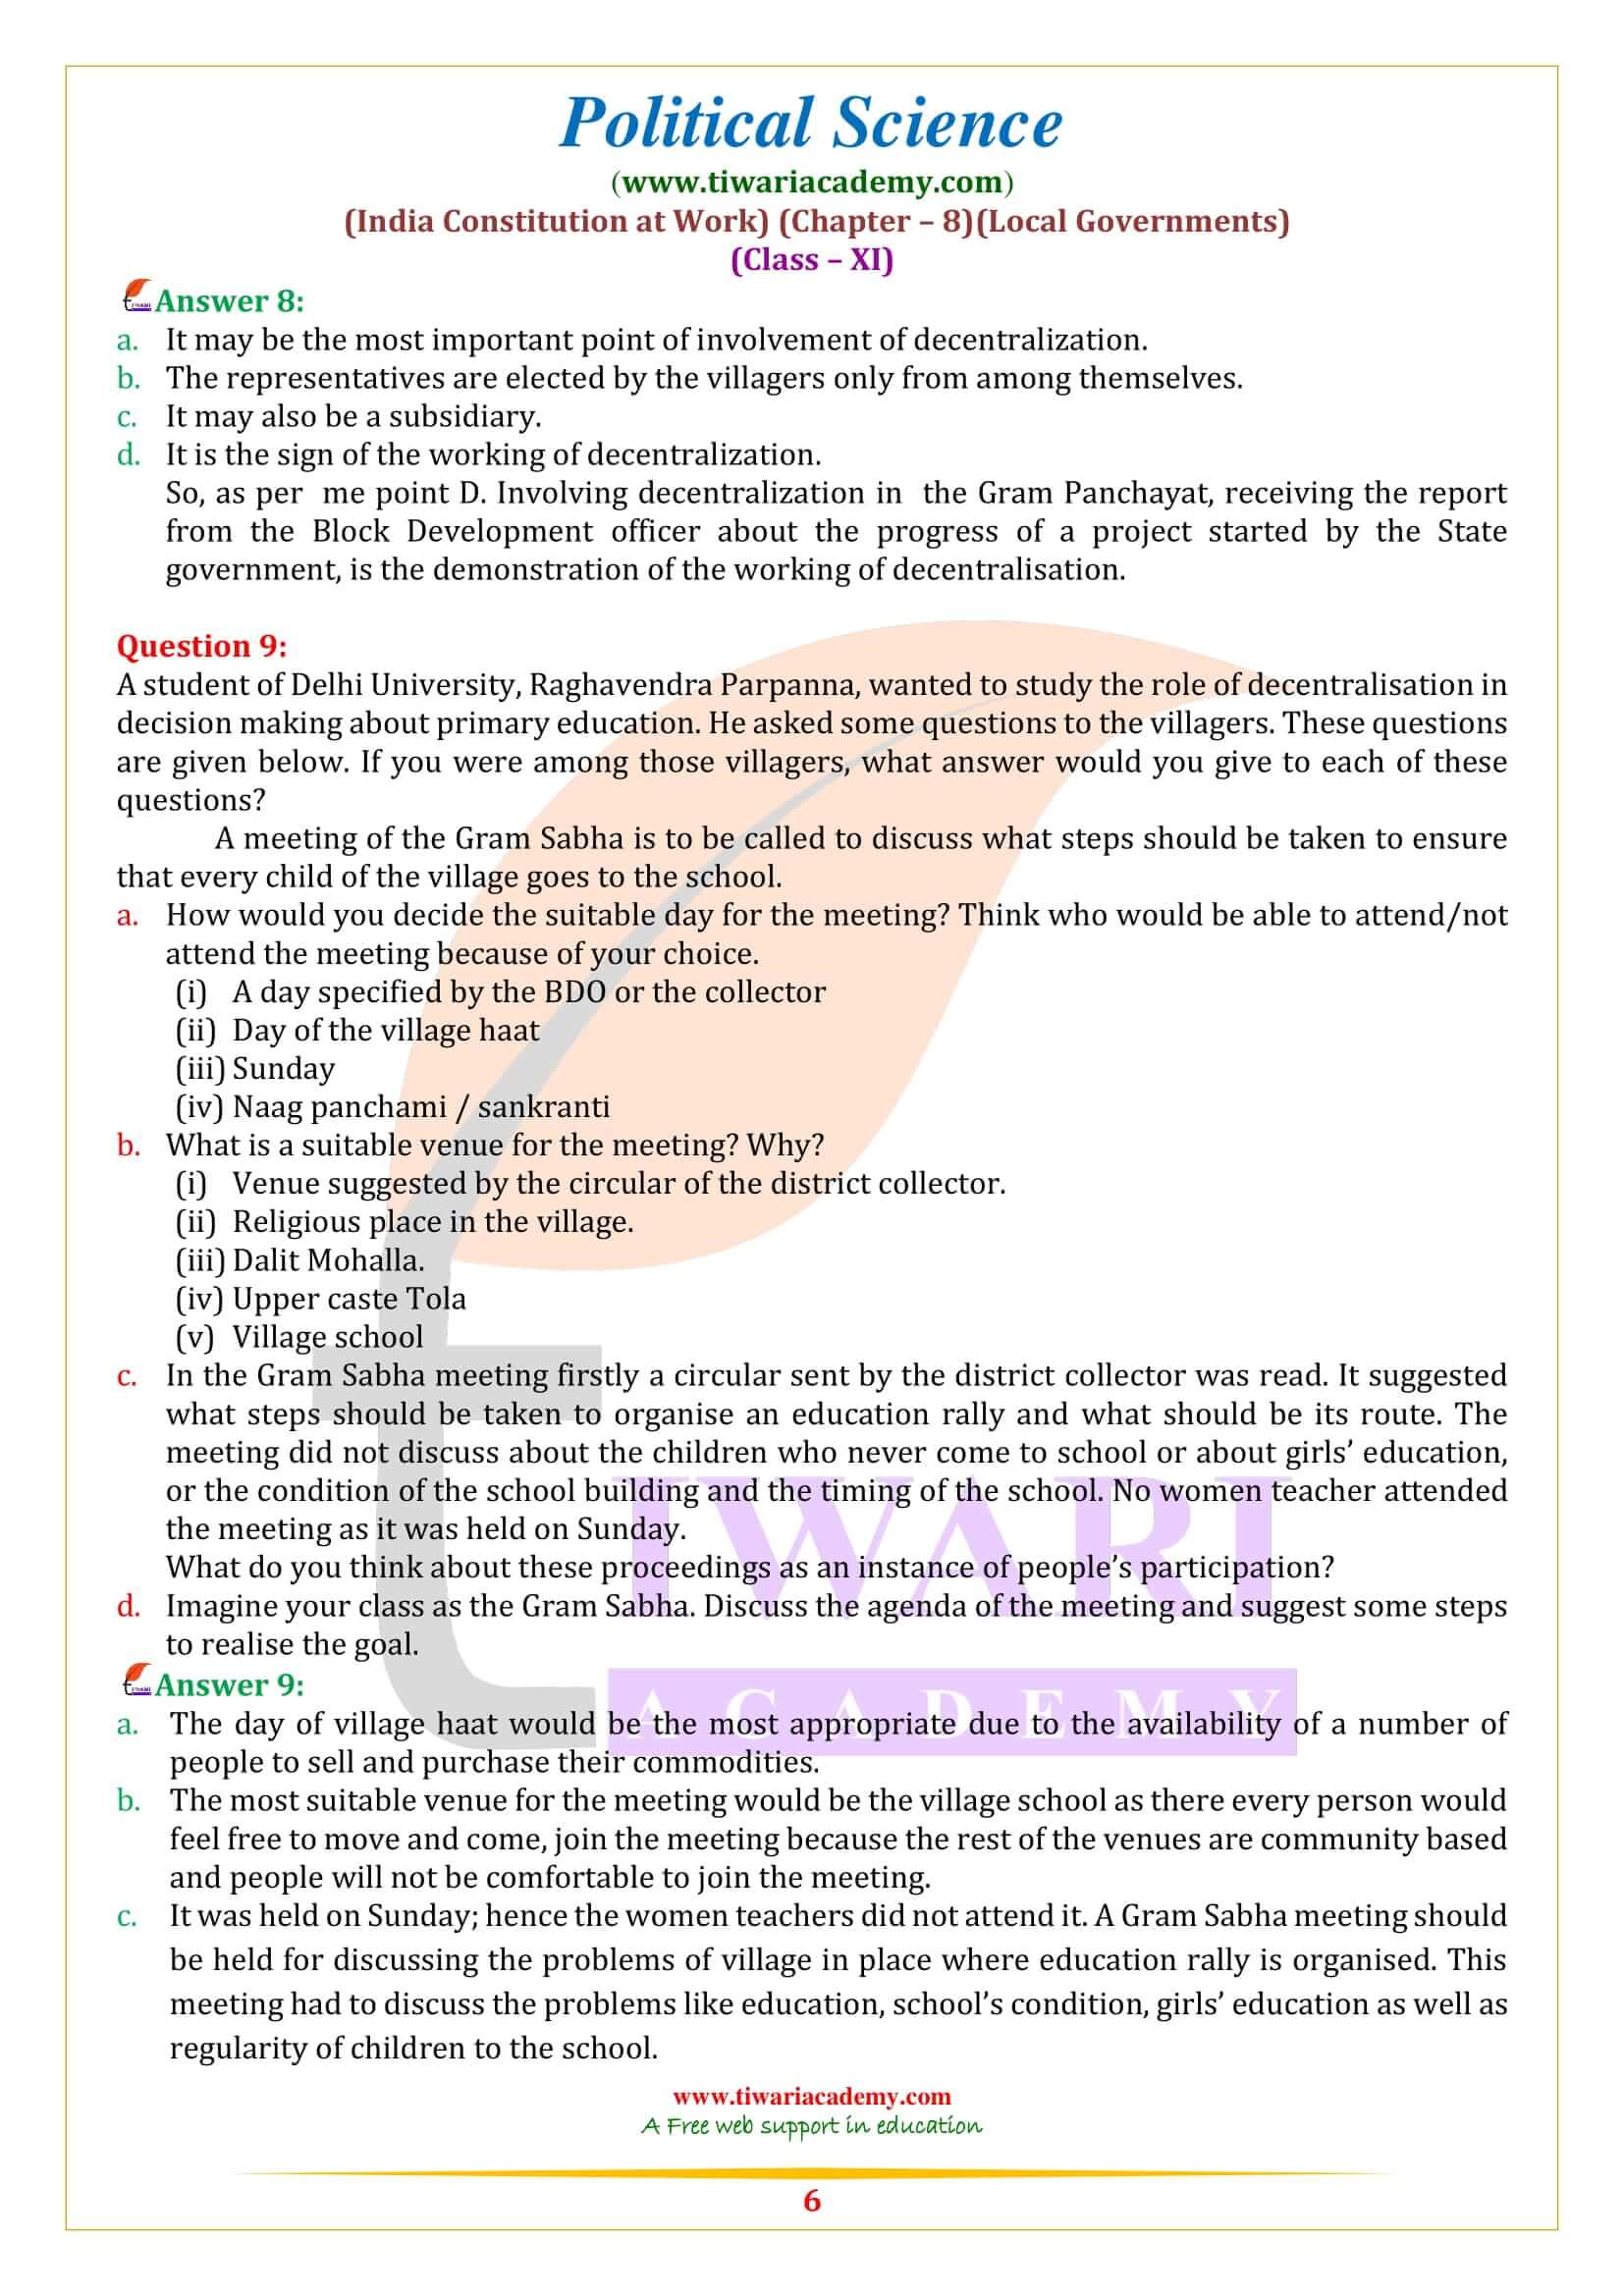 NCERT Solutions for Class 11 Political Science Chapter 8 guide